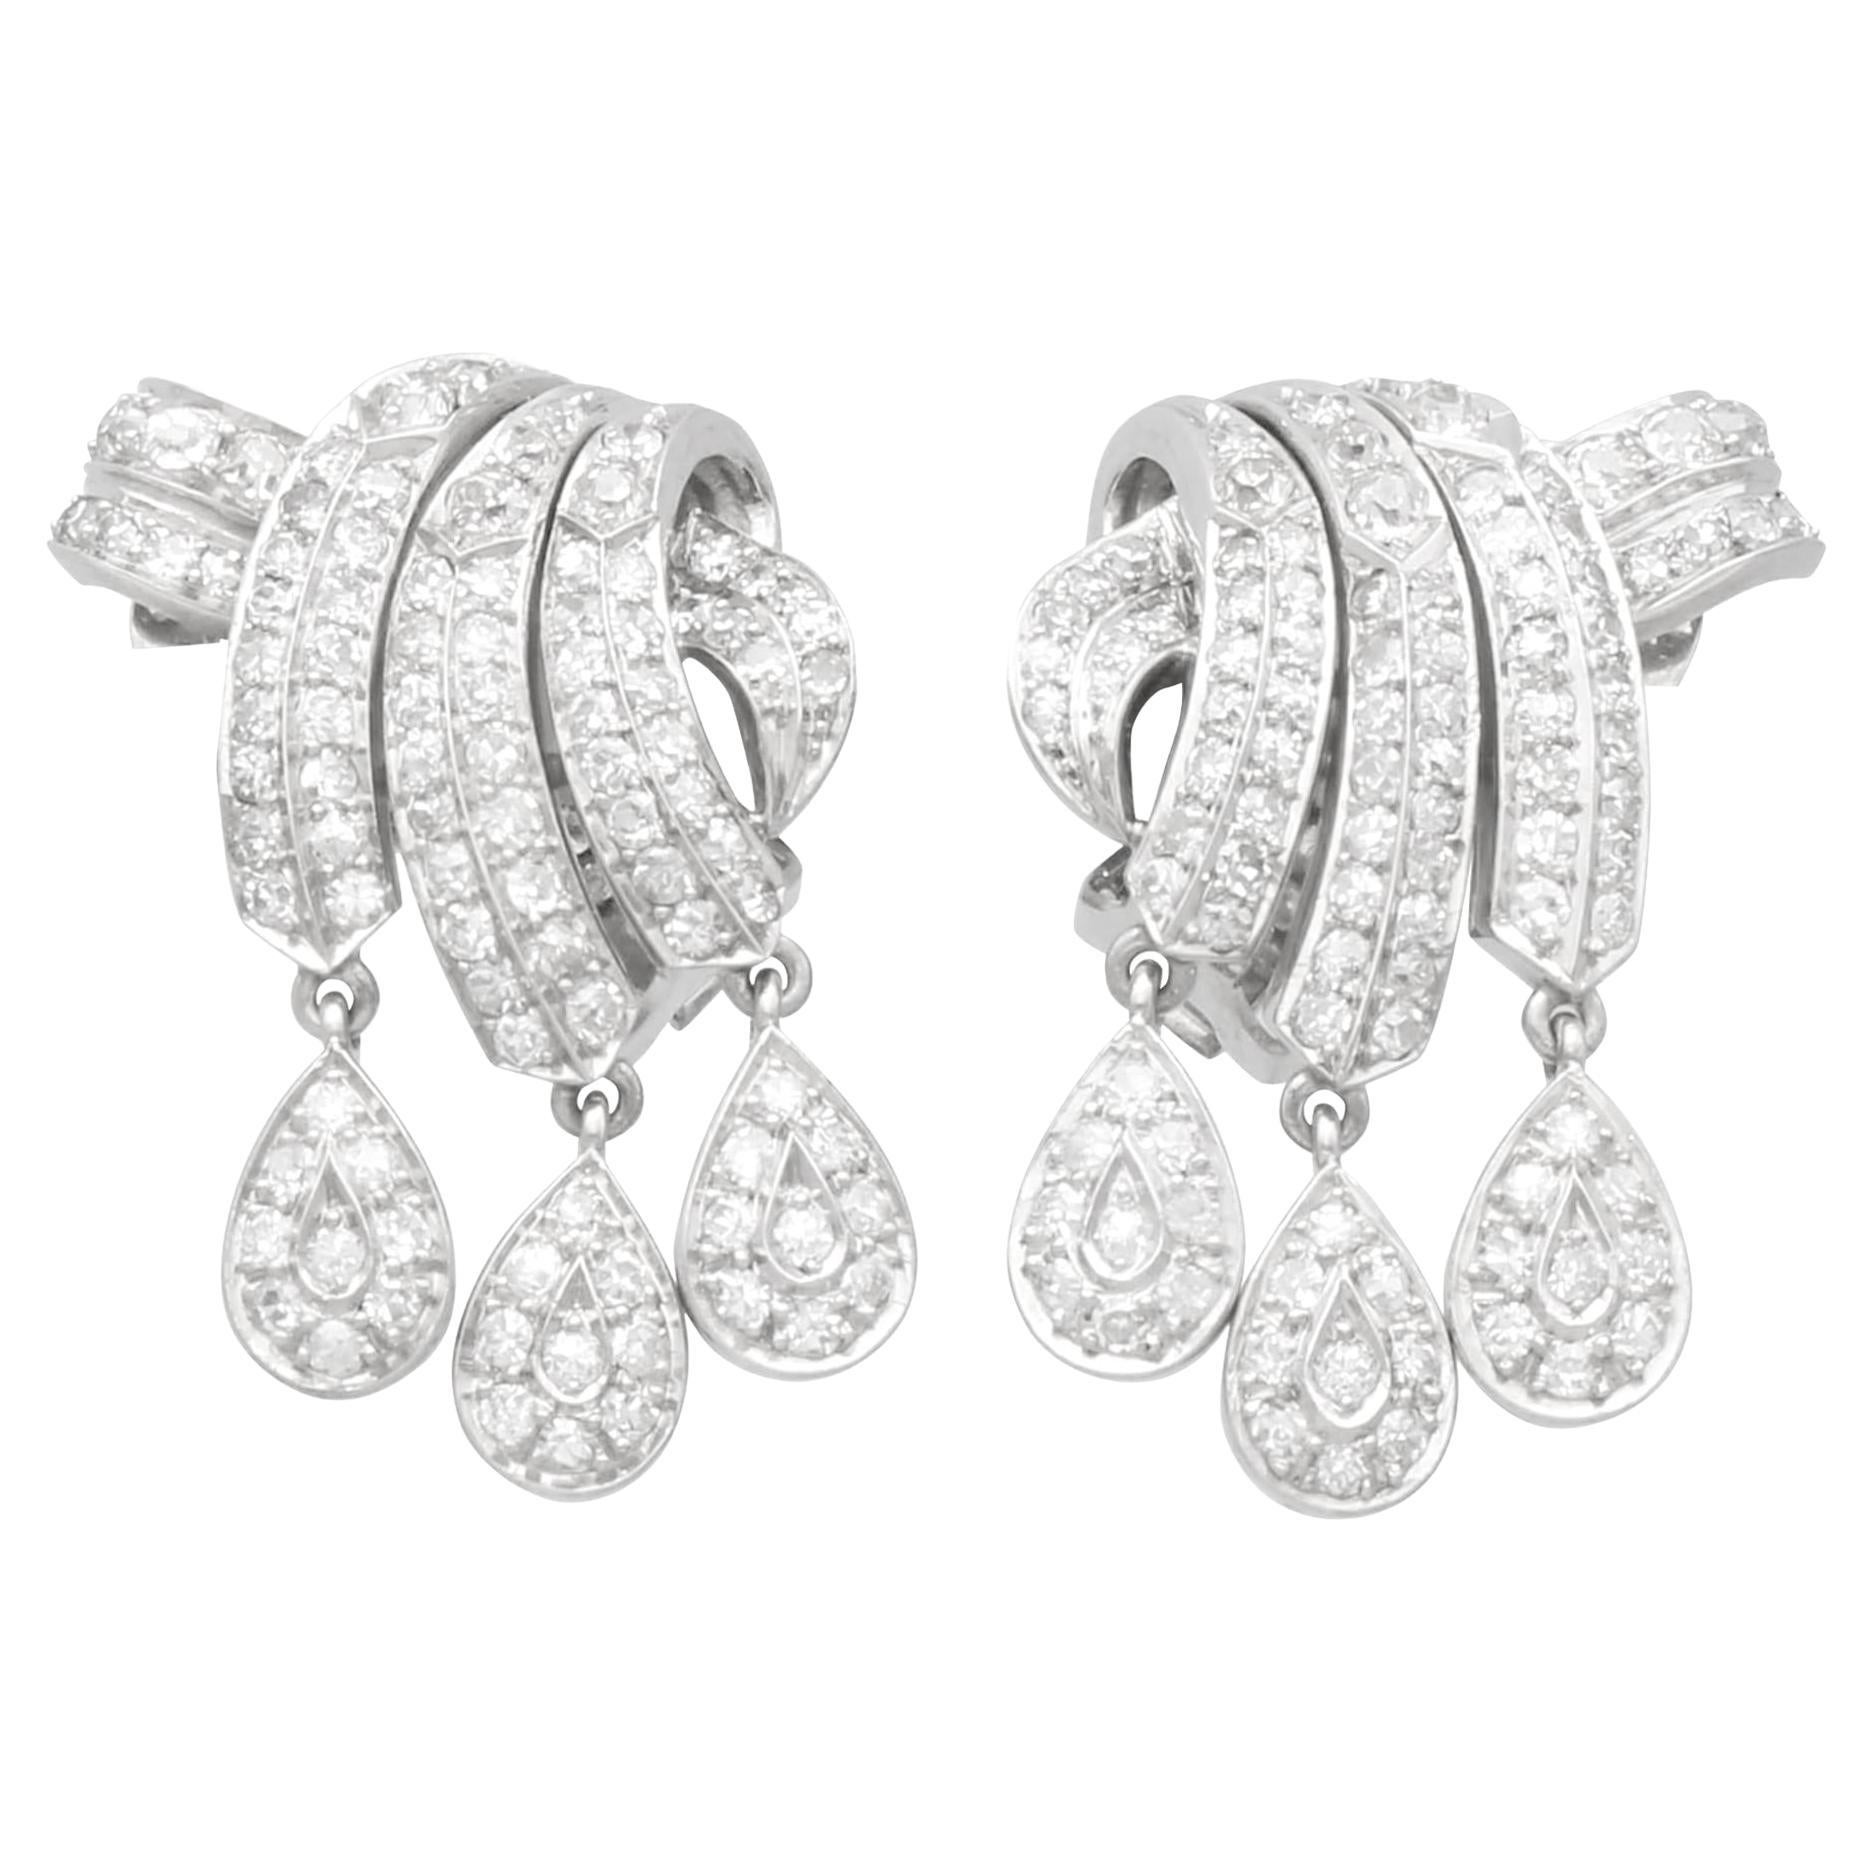 1930s Antique 4.26 Carat Diamond and Platinum Earrings For Sale